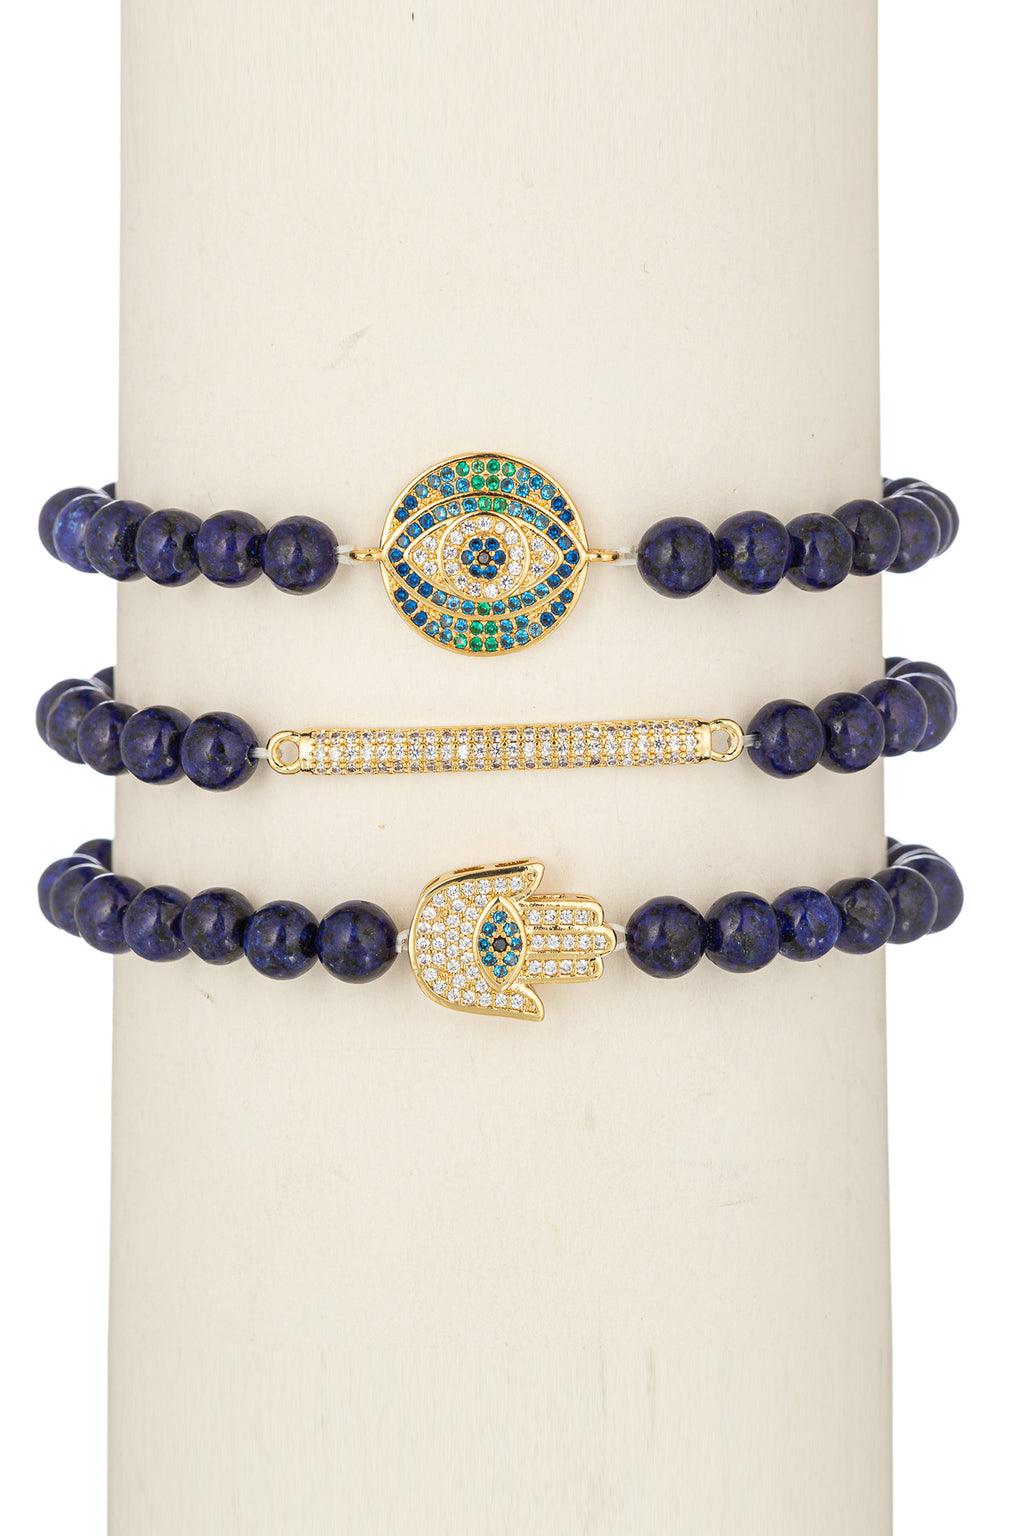 Agate beaded bracelet set with gold pendants that are studded with CZ crystals.